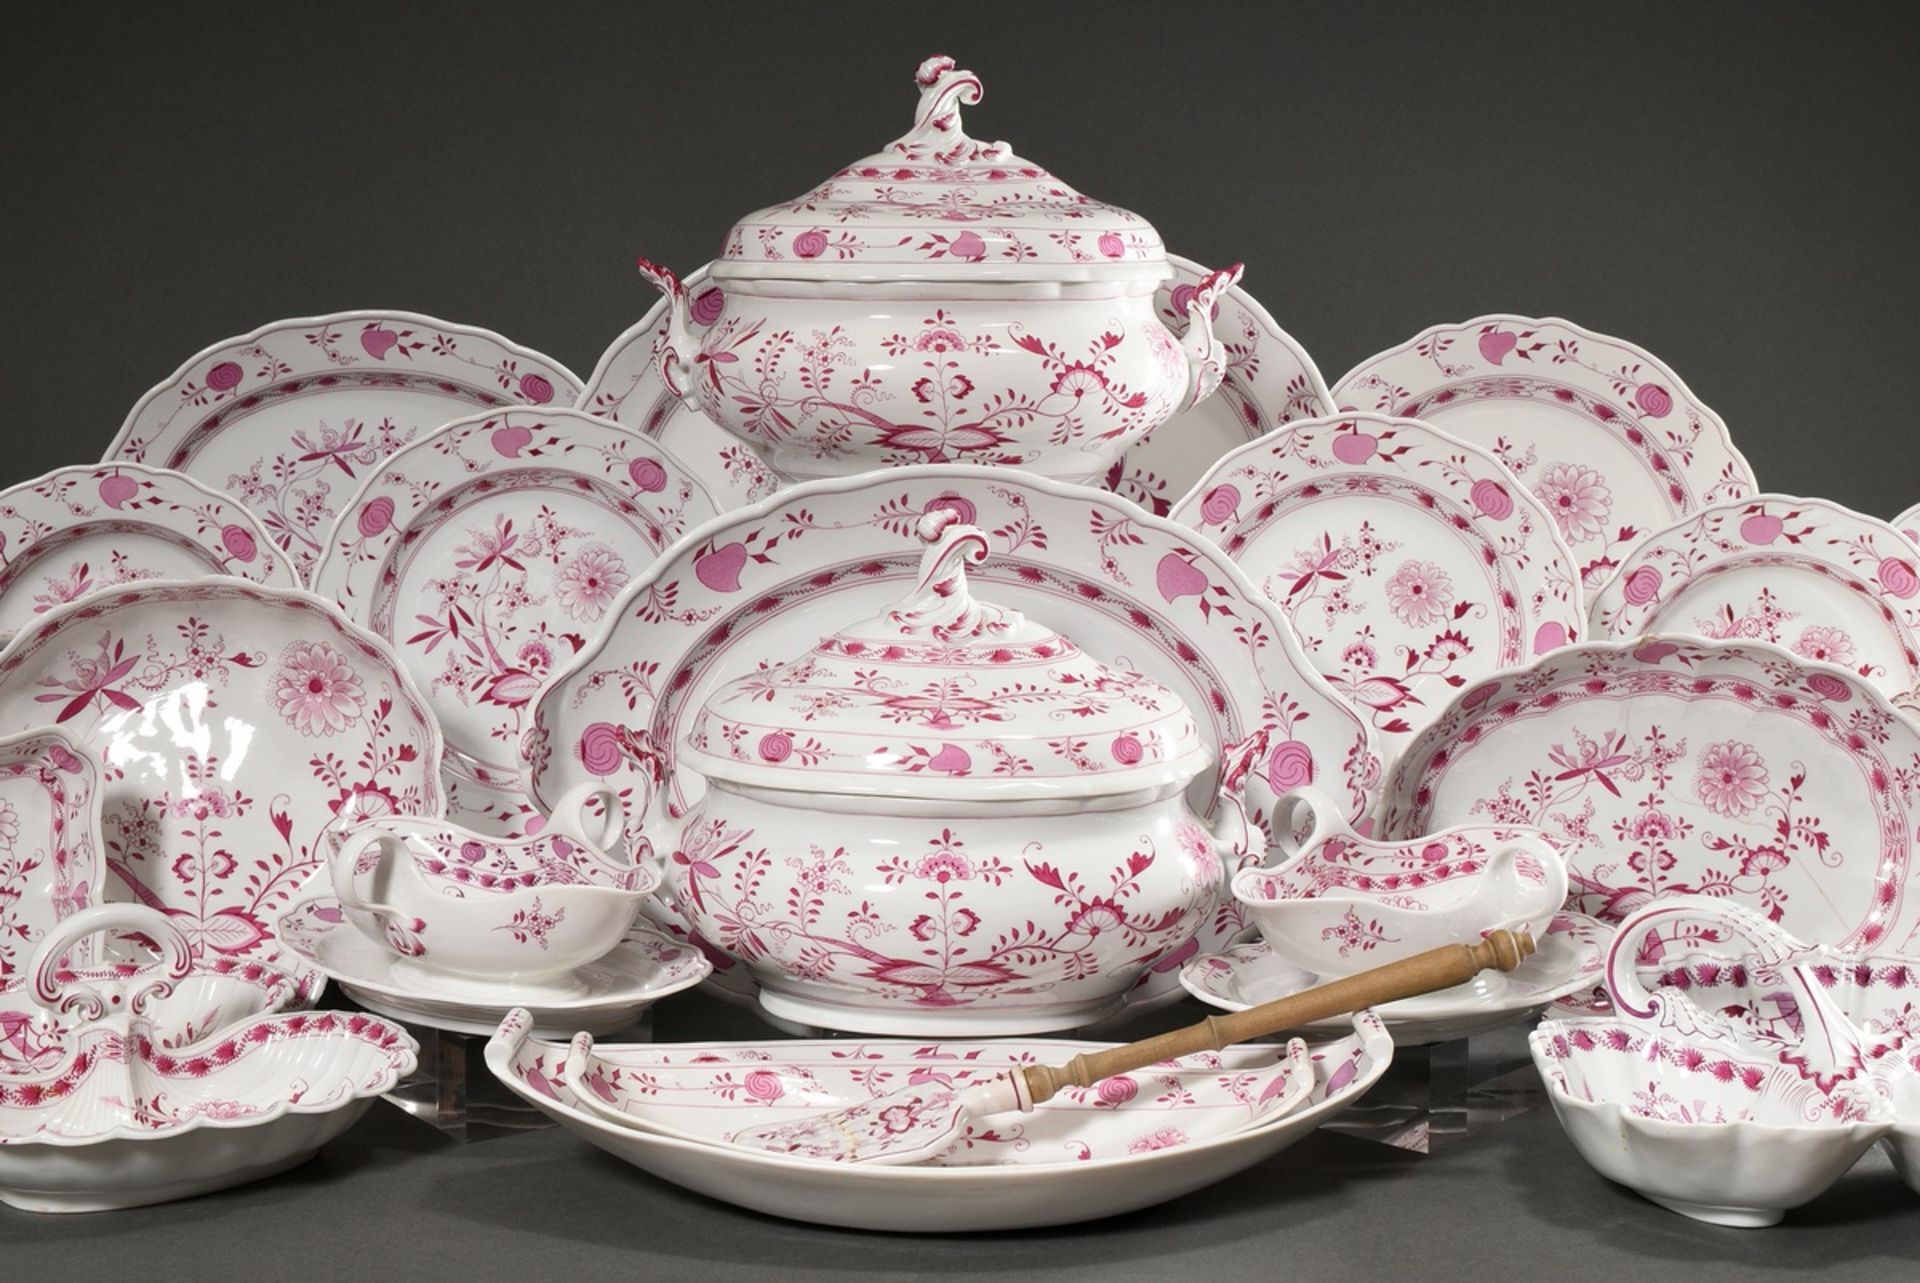 65 Pieces rare Meissen dinner service "Zwiebelmuster Pink", custom made around 1900, consisting of: - Image 3 of 27